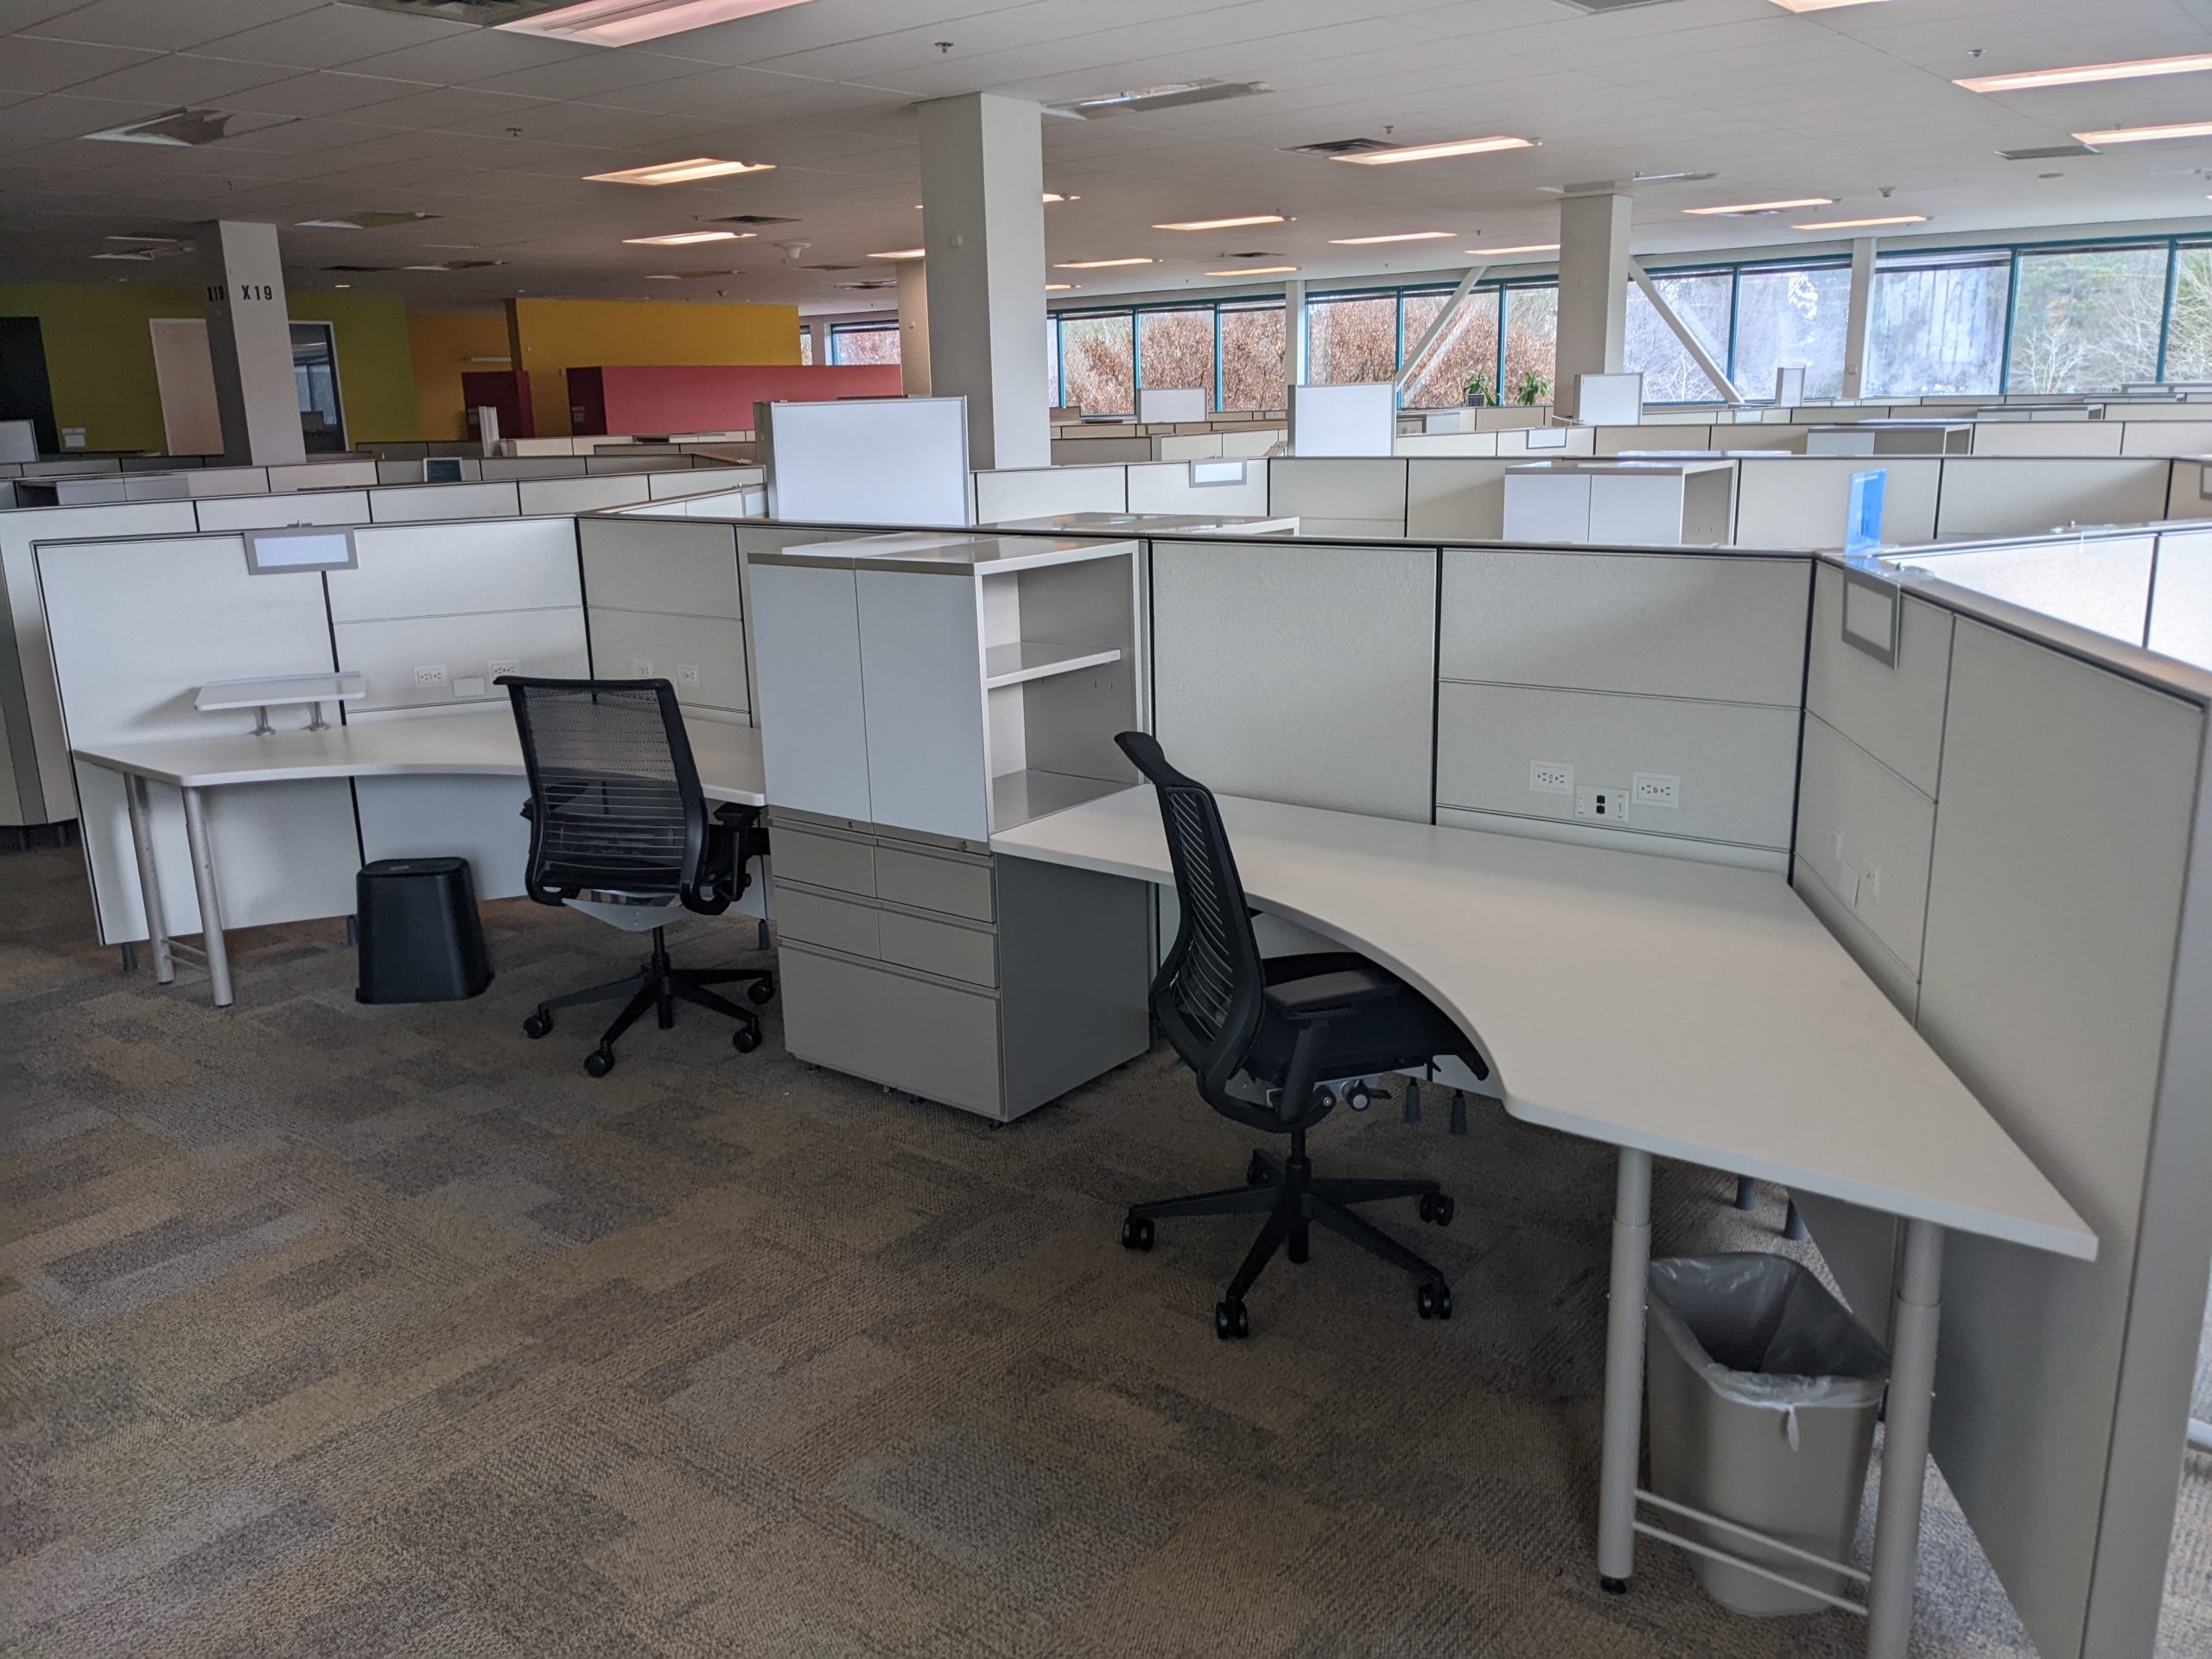 Office cubicles with chairs